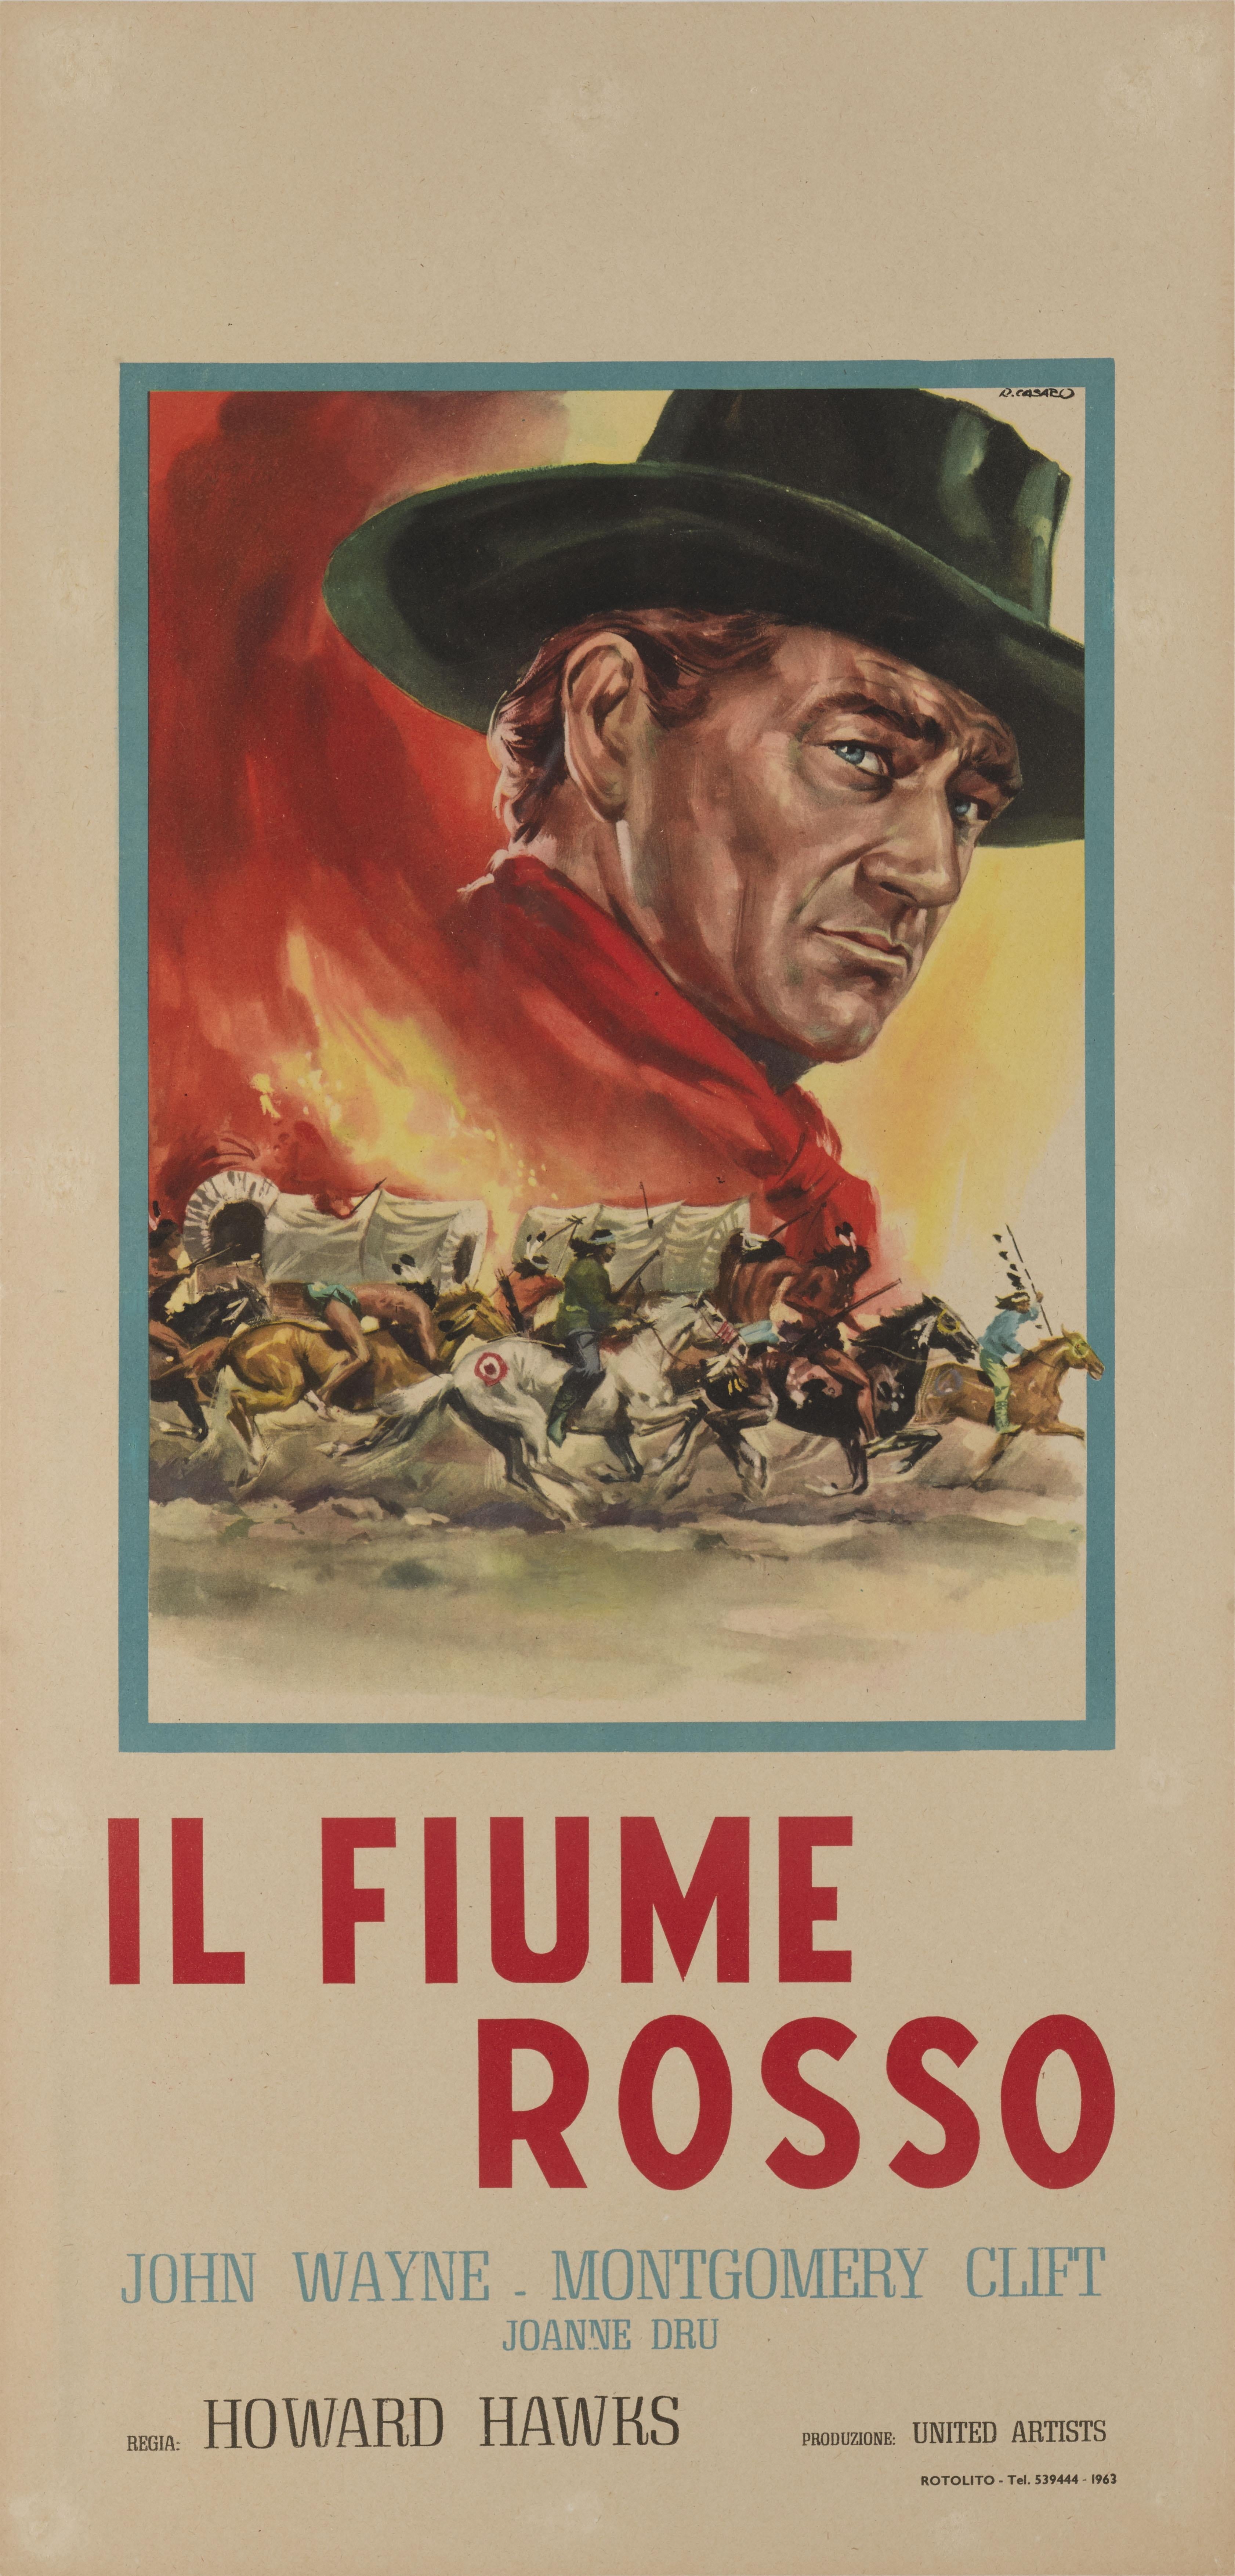 Original Italian film poster for the 1948 western directed by Howard Hawks and starring John Wayne. This size poster would have been used outside the cinema in glass display case.This poster was created for the films 1963 re-release. The artwork on